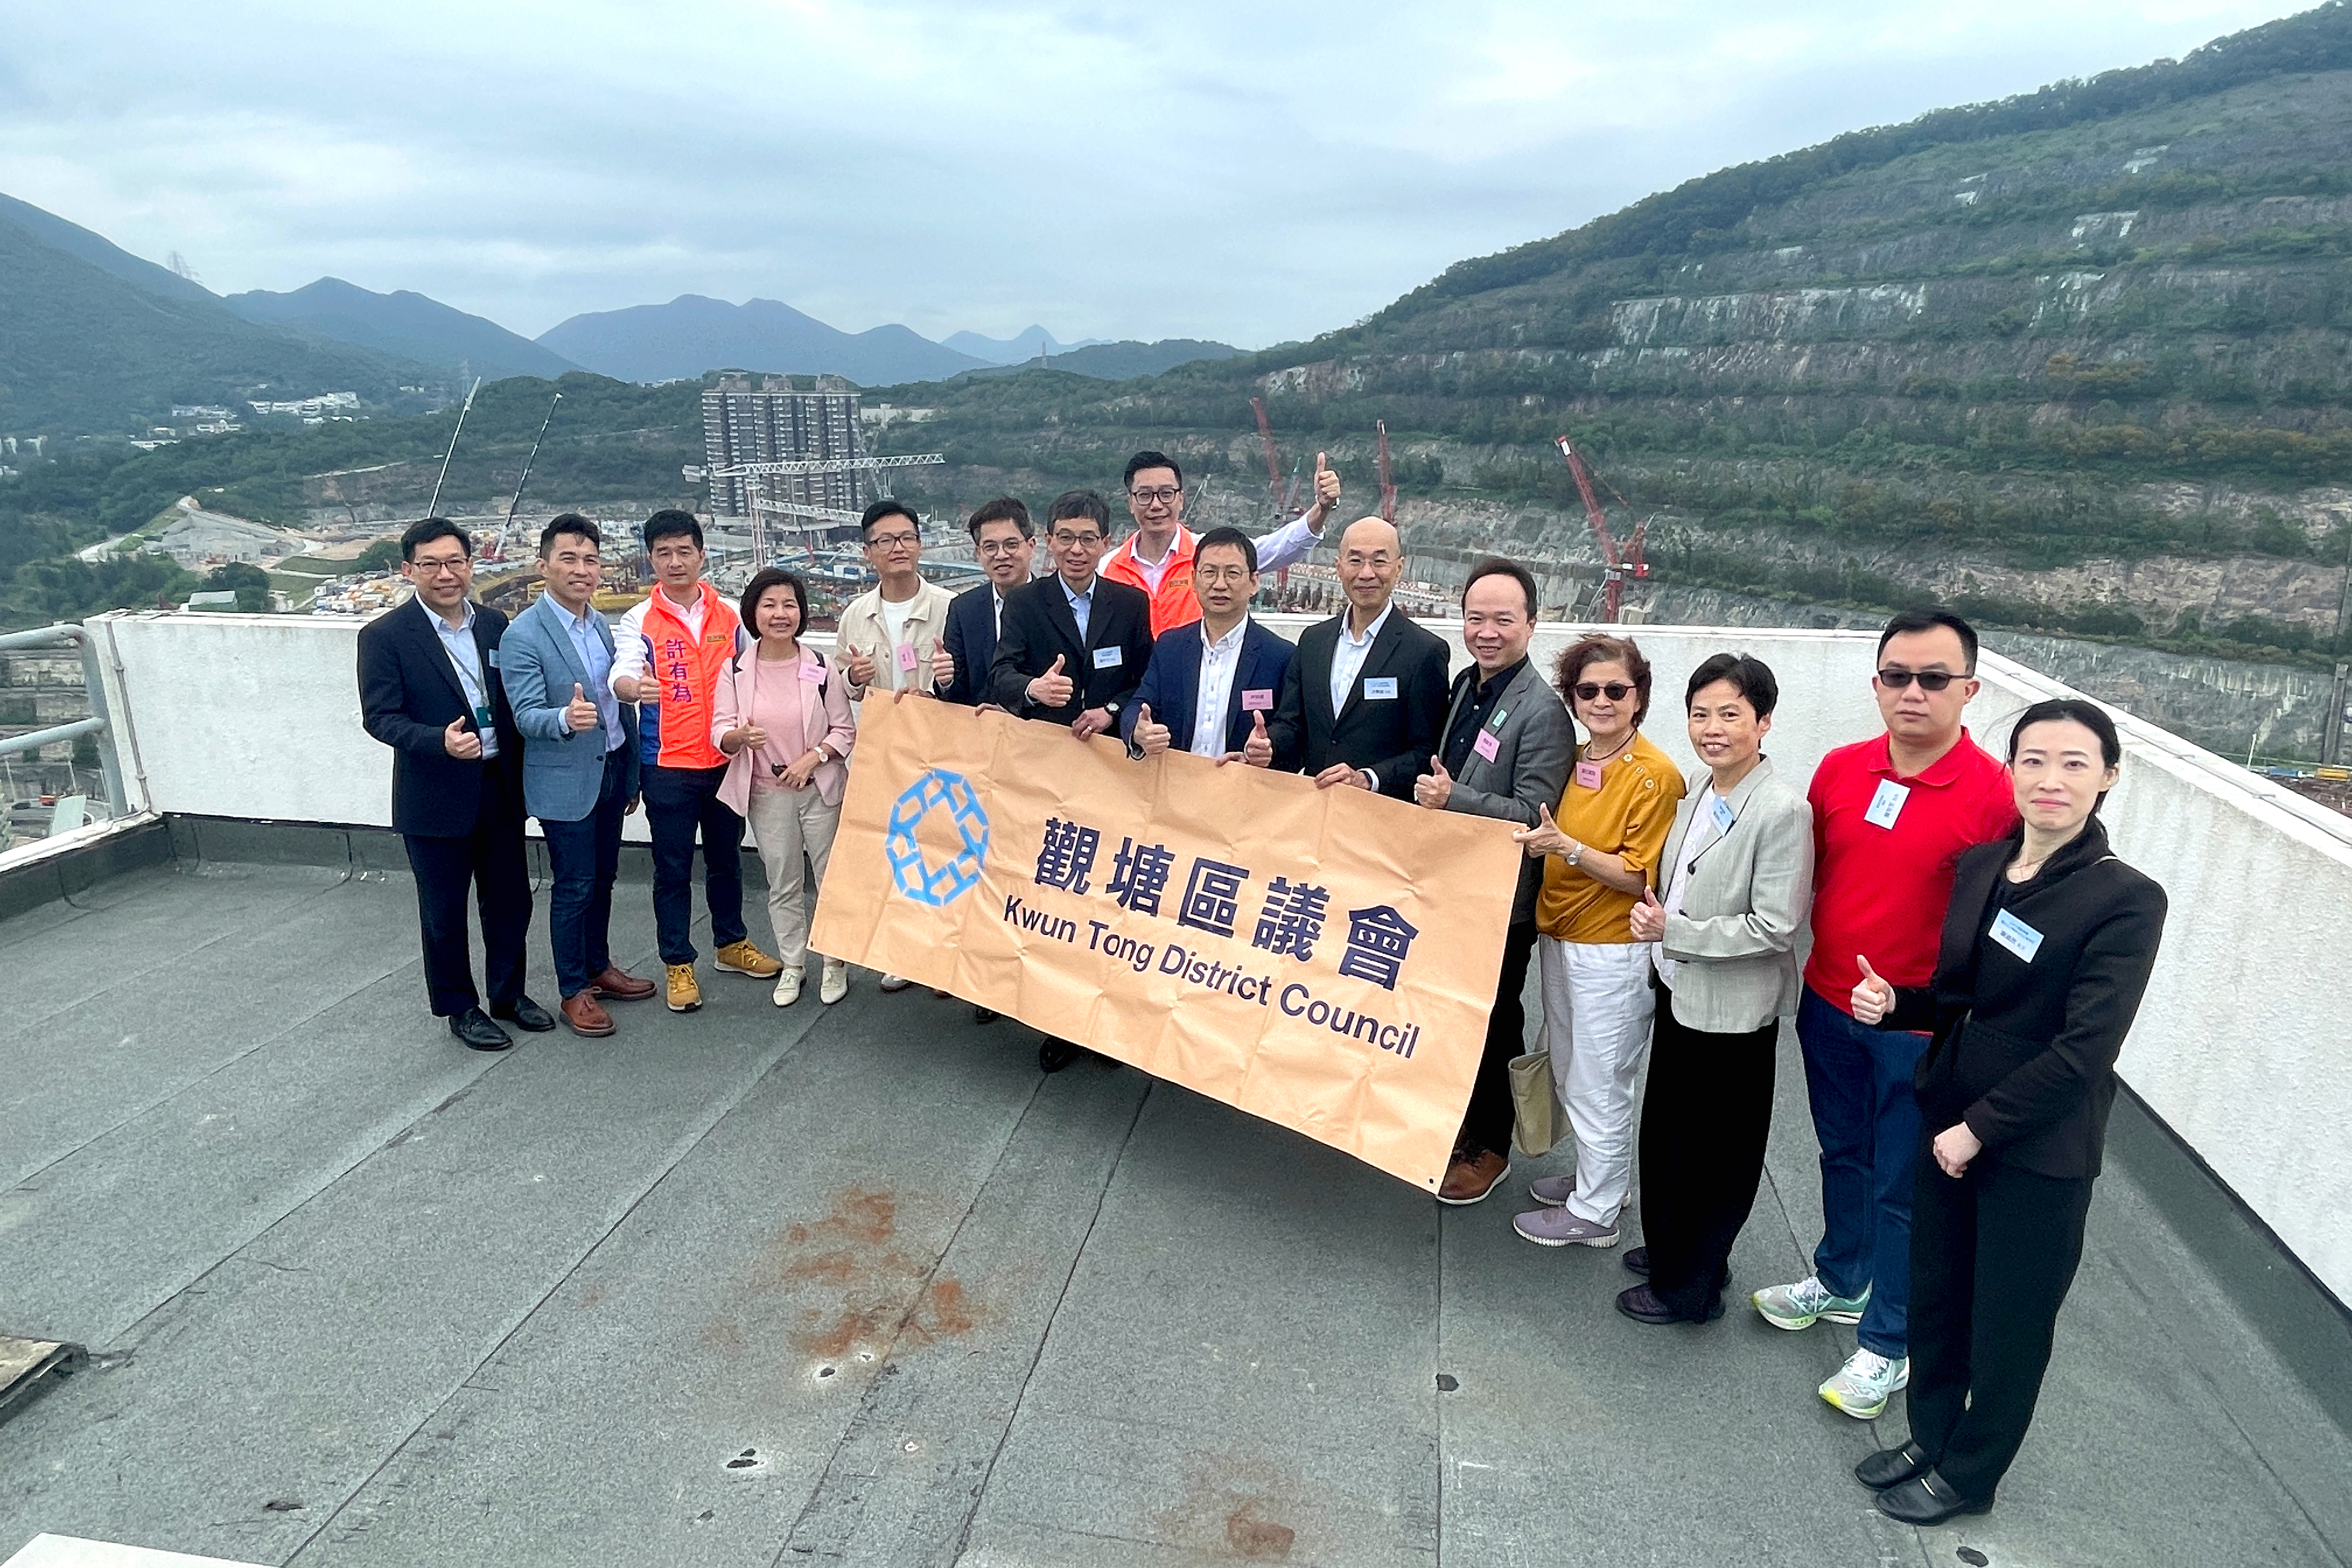 Mr. FONG Hok Shing, Michael, Director of the Civil Engineering and Development Department, and Mr. LEUNG Chung Lap, Michael, Project Manager (East) of CEDD, updated the Kwun Tong District Council members on the latest developments of the Anderson Road Quarry Site.